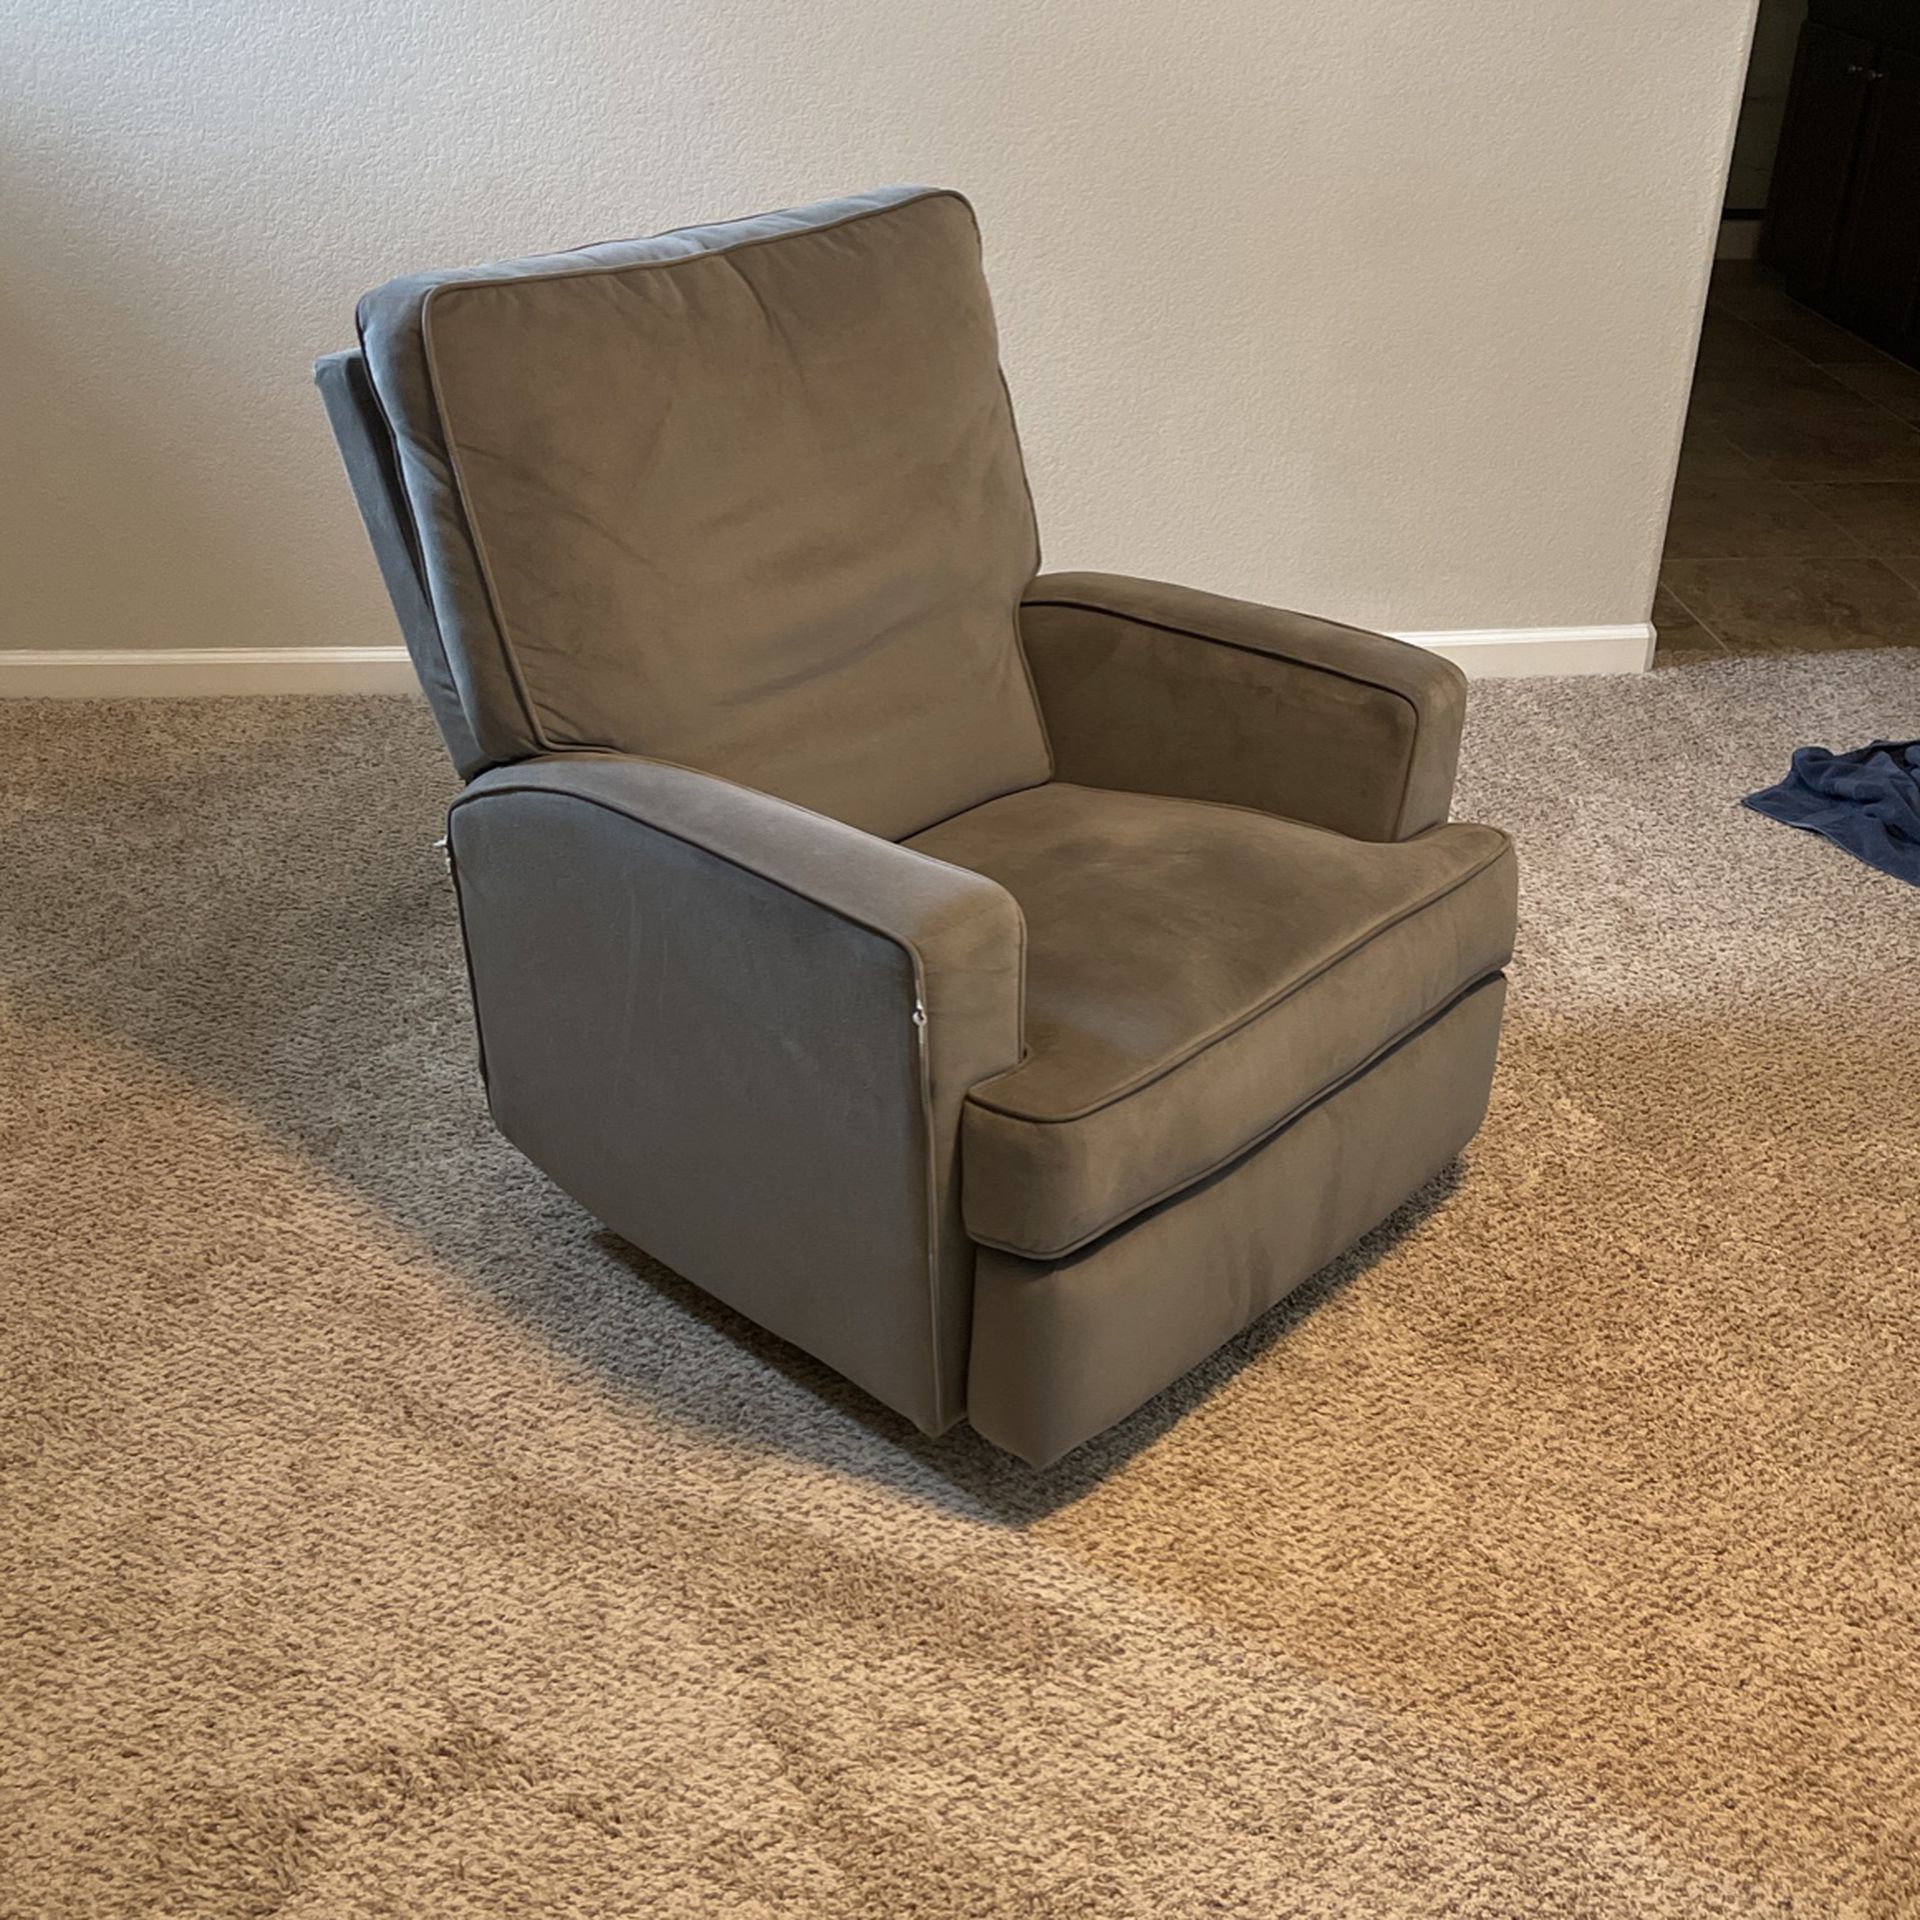 Rocking chair with recliner